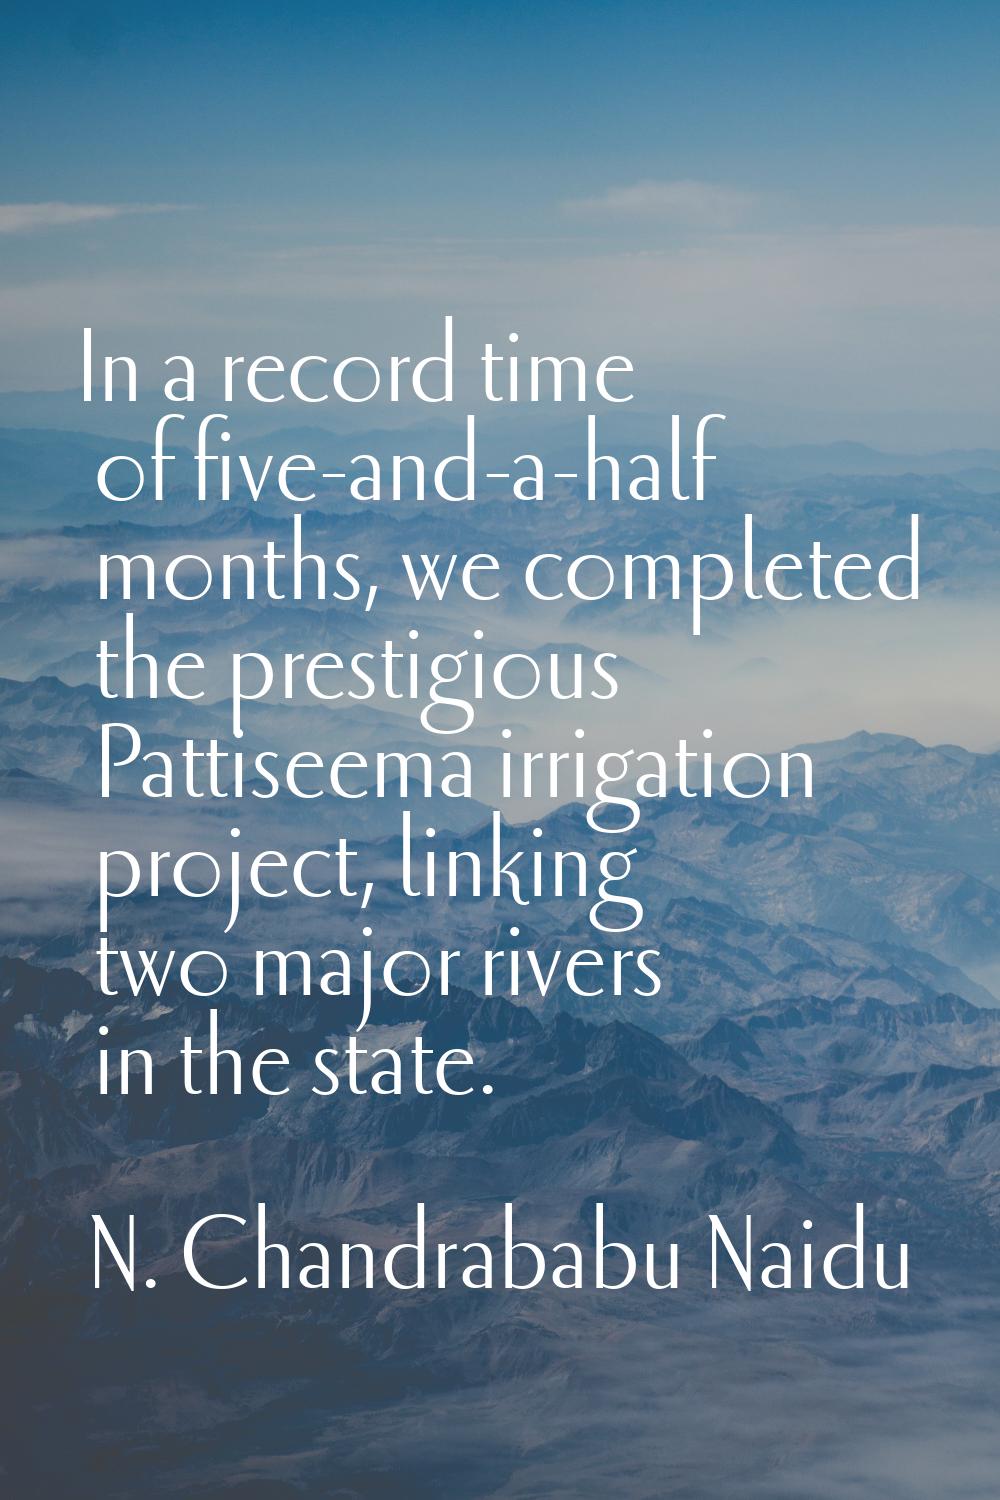 In a record time of five-and-a-half months, we completed the prestigious Pattiseema irrigation proj